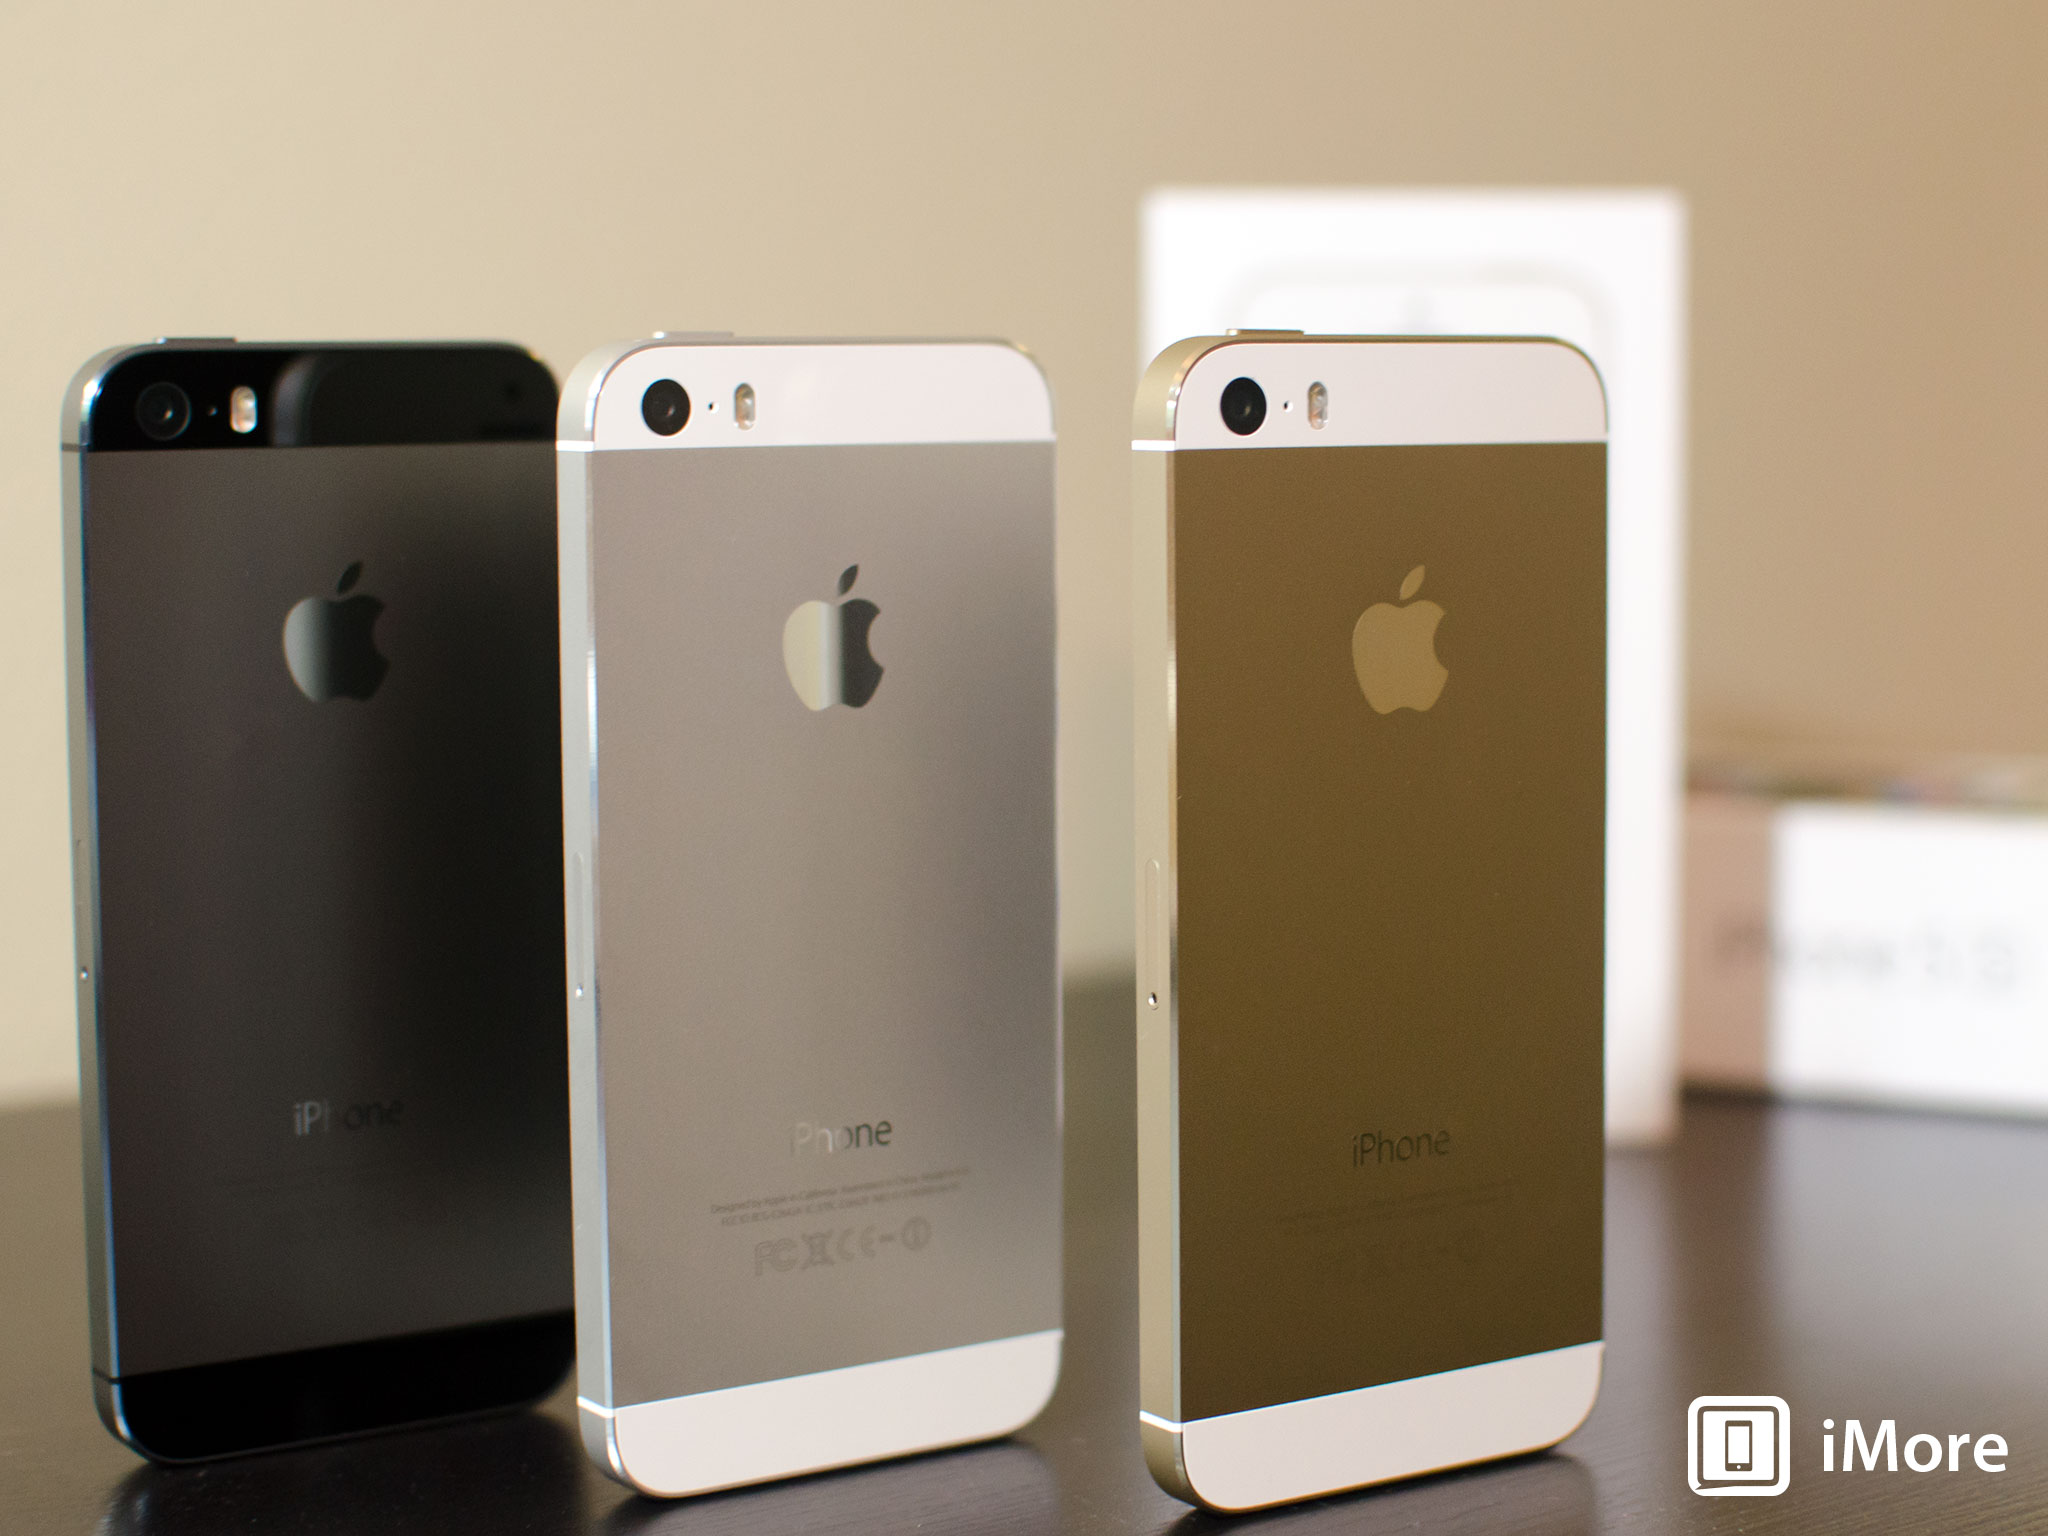 16GB, 32GB, or 64GB: Which iPhone 5s storage size should you get?